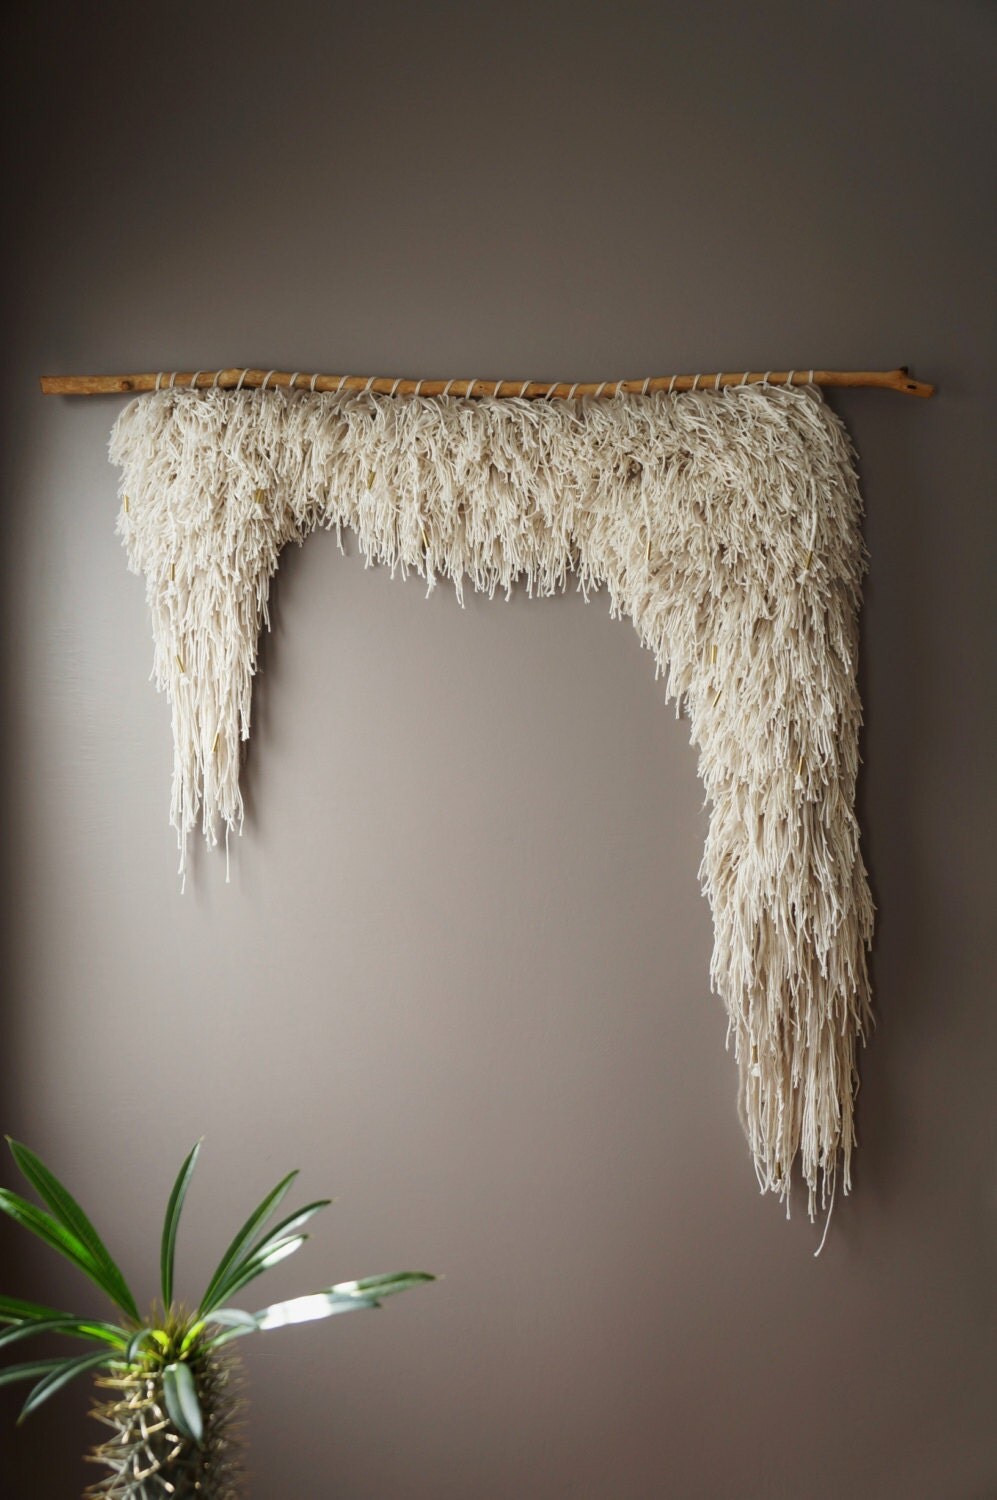 Woven Wall Hanging Cotton Wool Tapestry Handwoven Textile